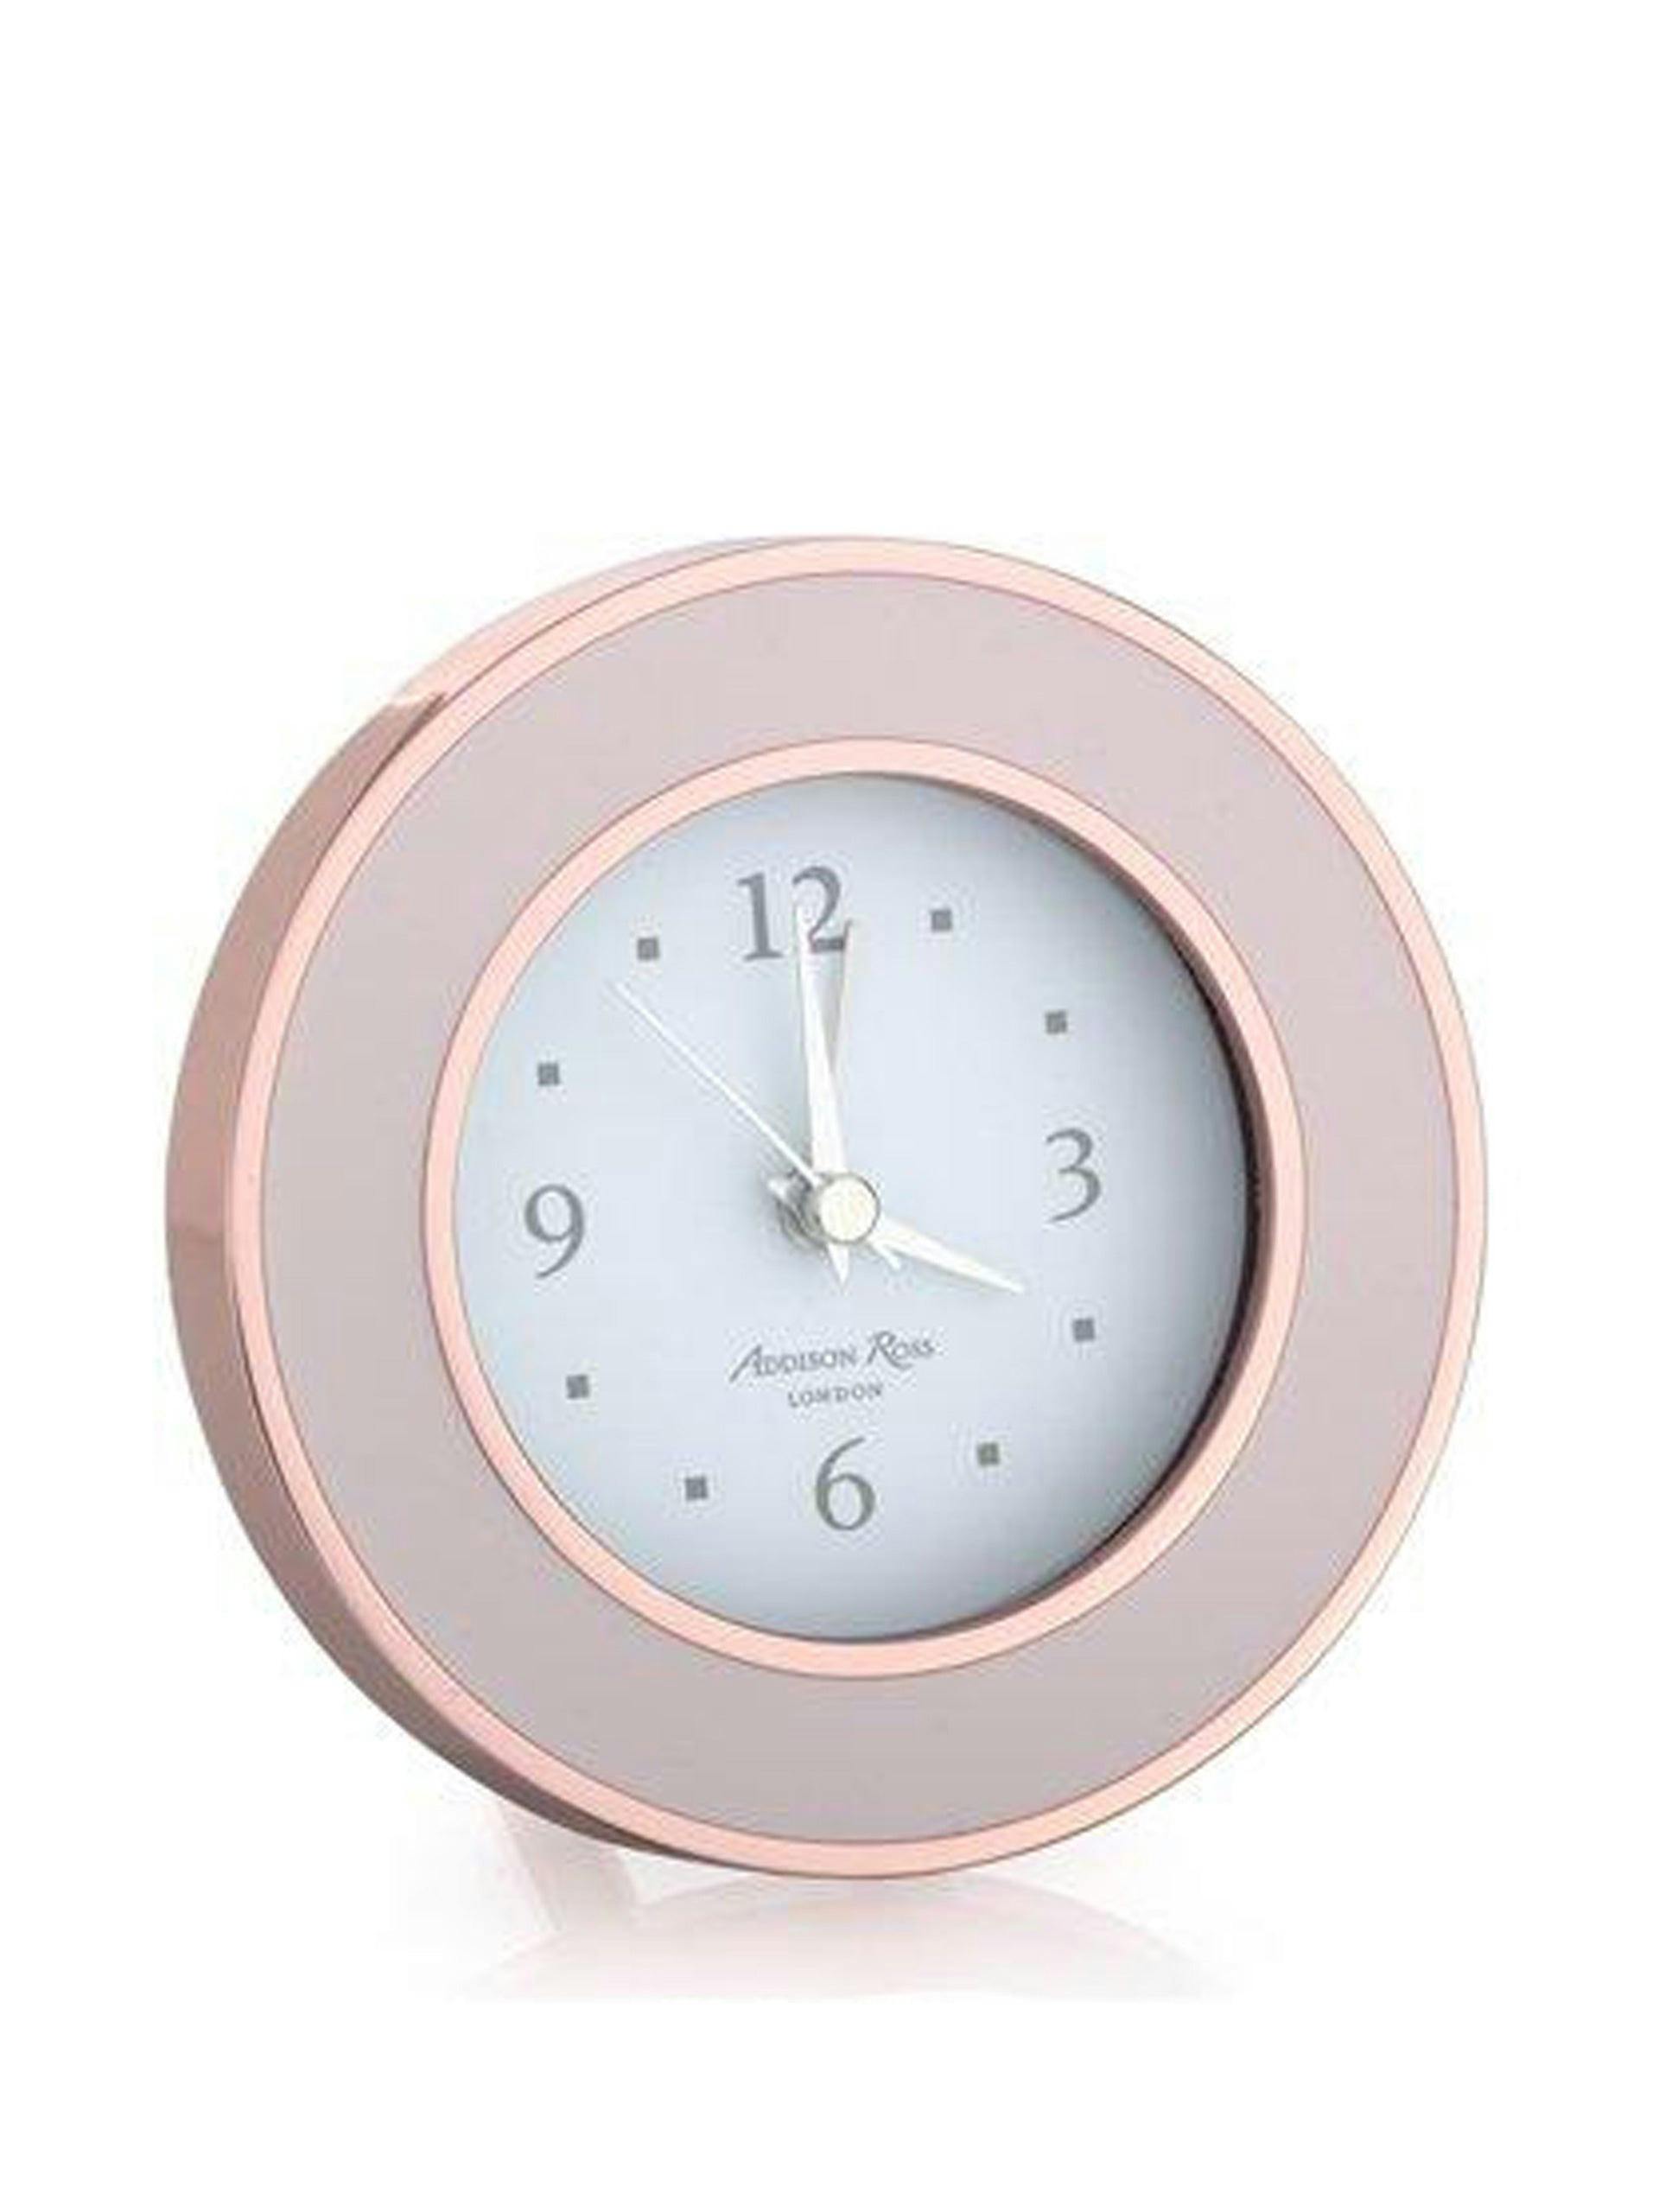 Pink and rose gold alarm clock